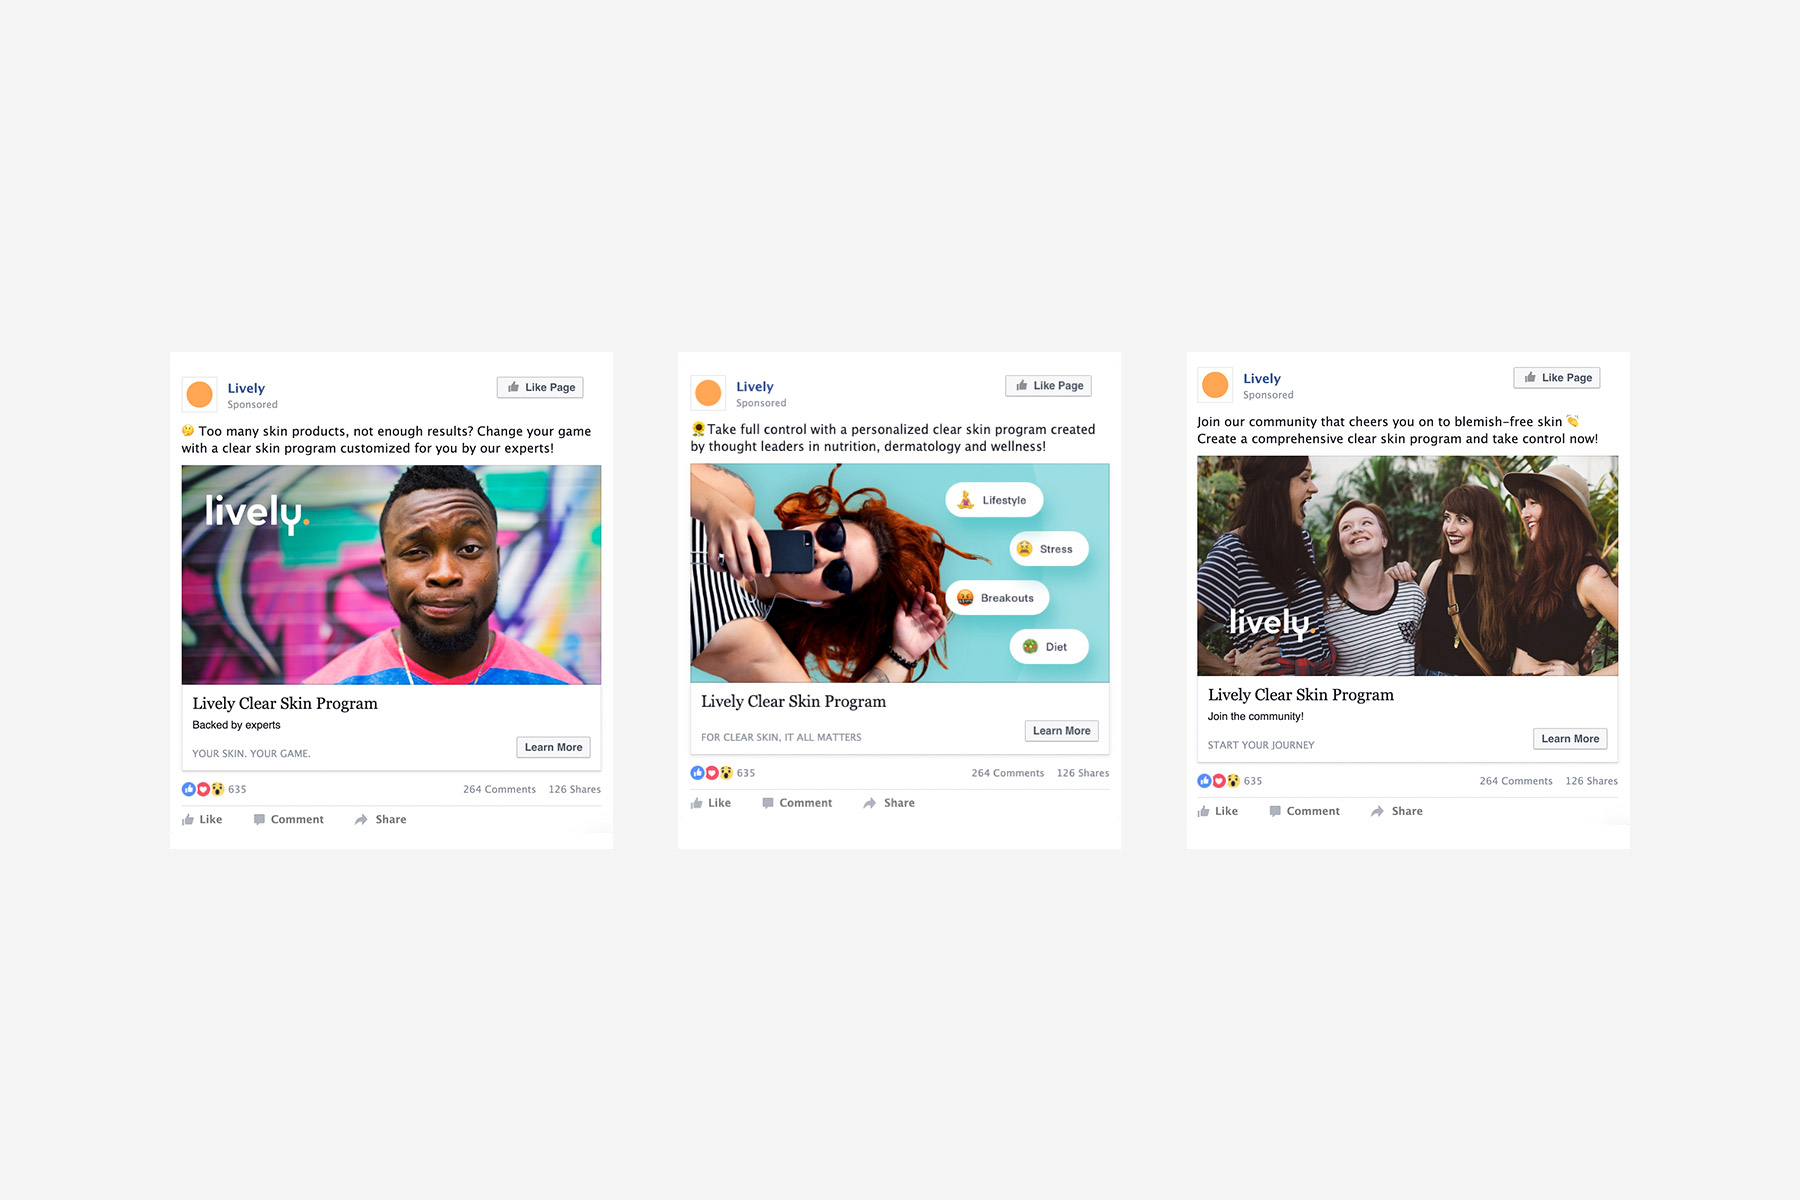 lively Instagram and Facebook social media ads campaign designs